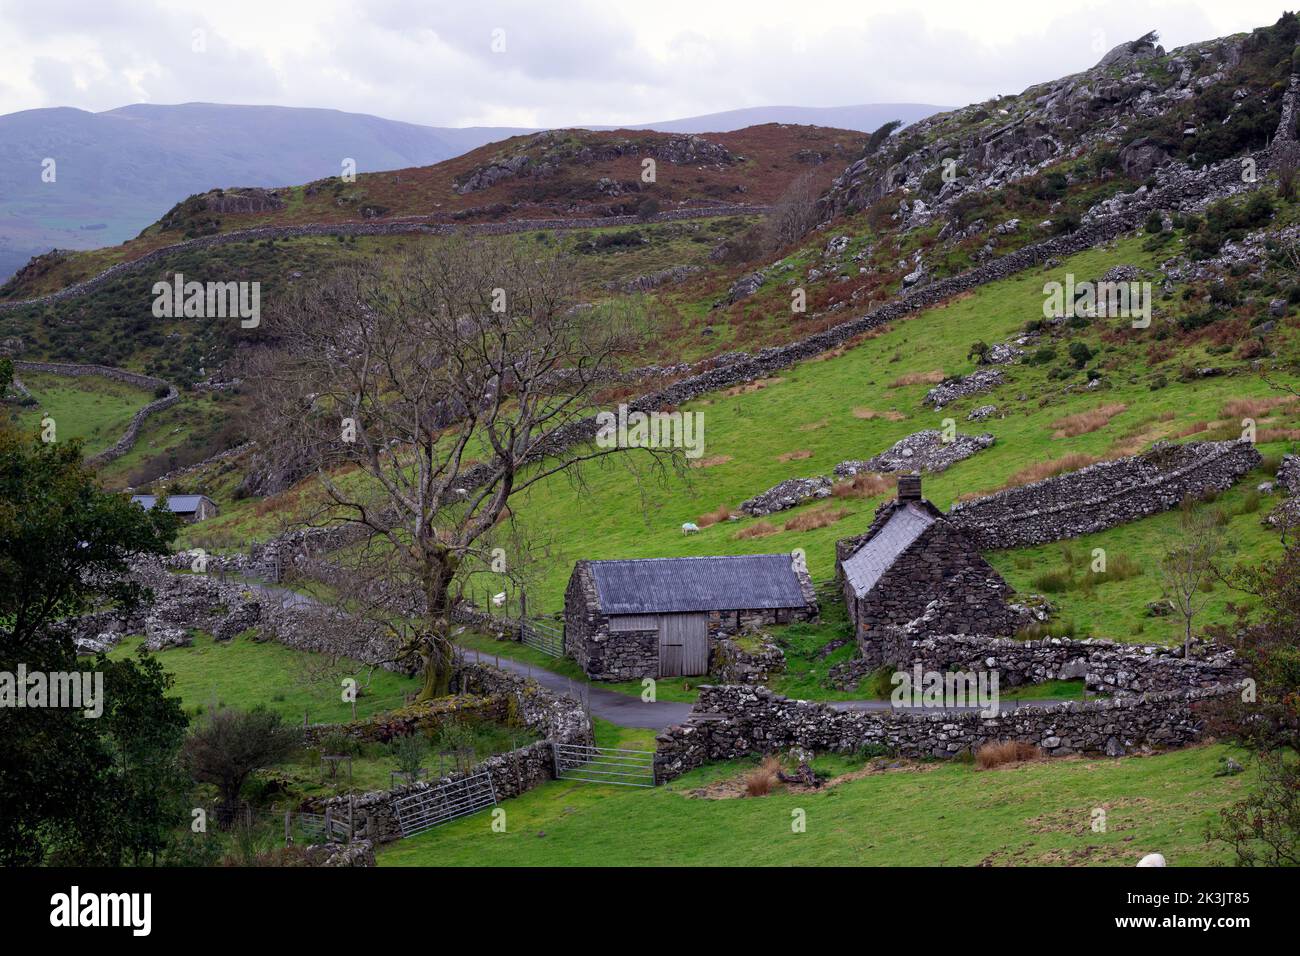 ARTHOG, WALES - OCTOBER 2nd, 2020: stone house and barn and dry stone walls, a typical Welsh landscape on a cloudy autumn afternoon, Gwynedd, Wales Stock Photo